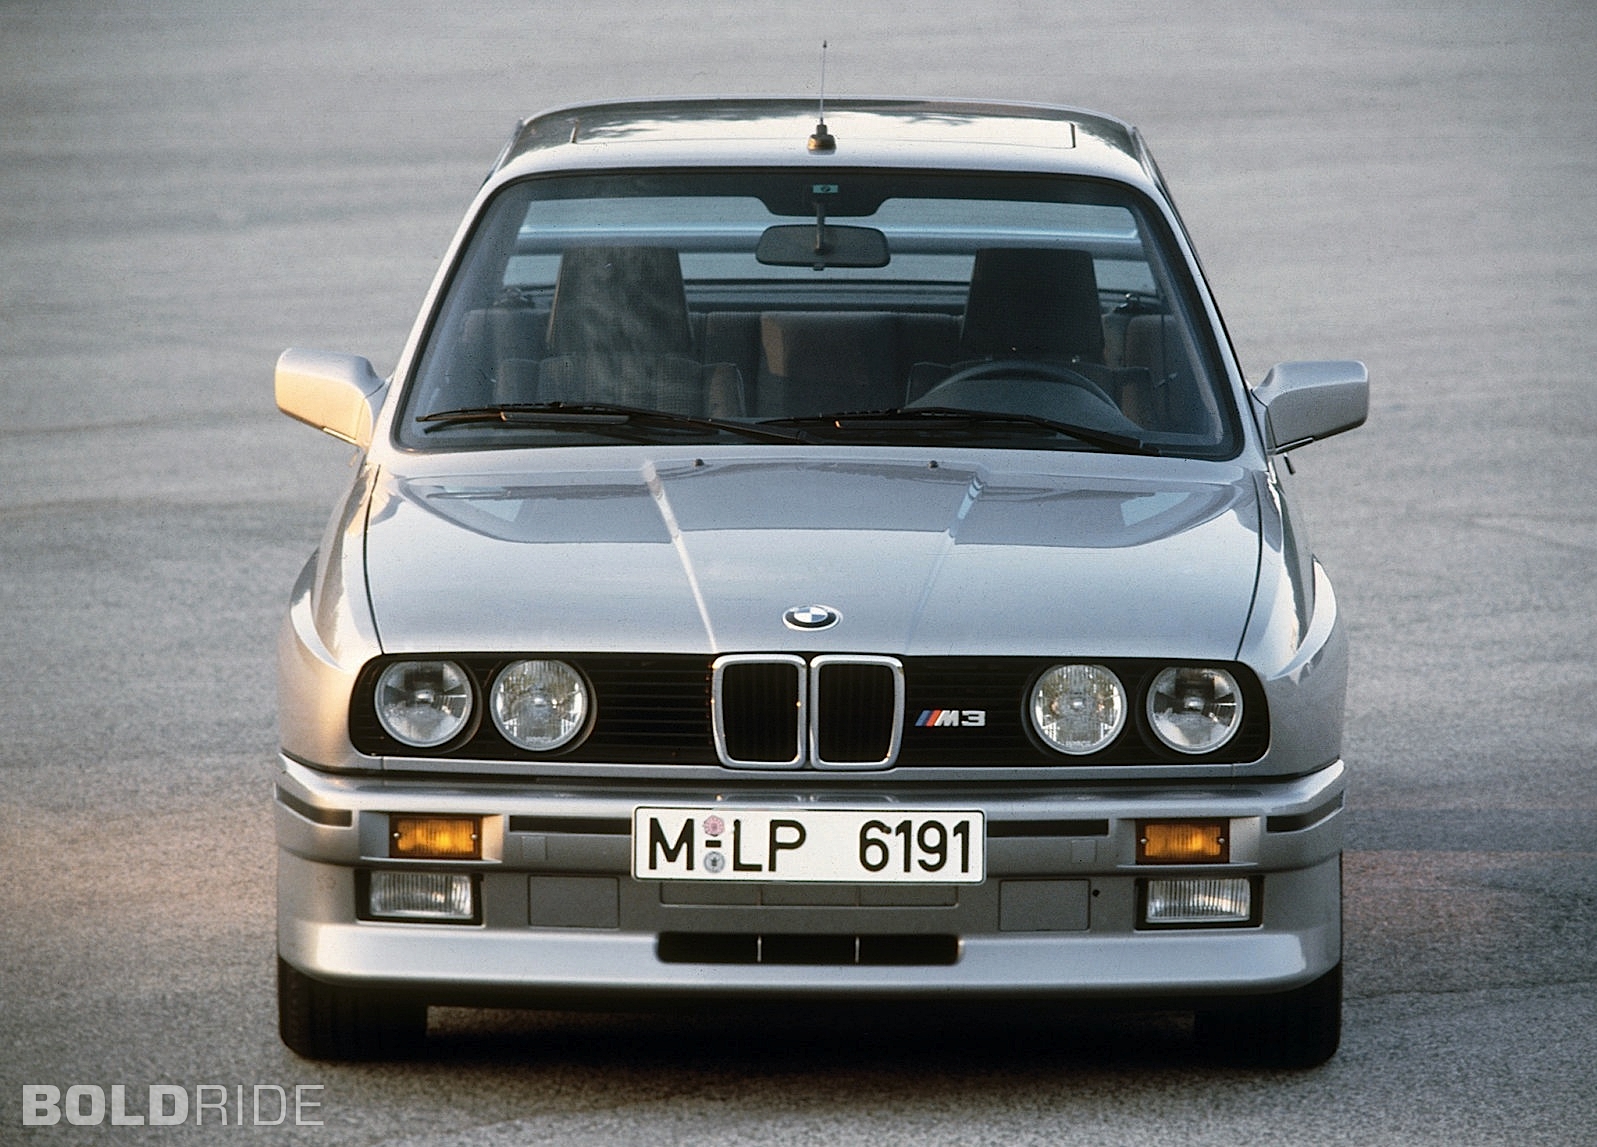  your Wednesday wheels wallpaper the timeless BMW M3 E30 coupe